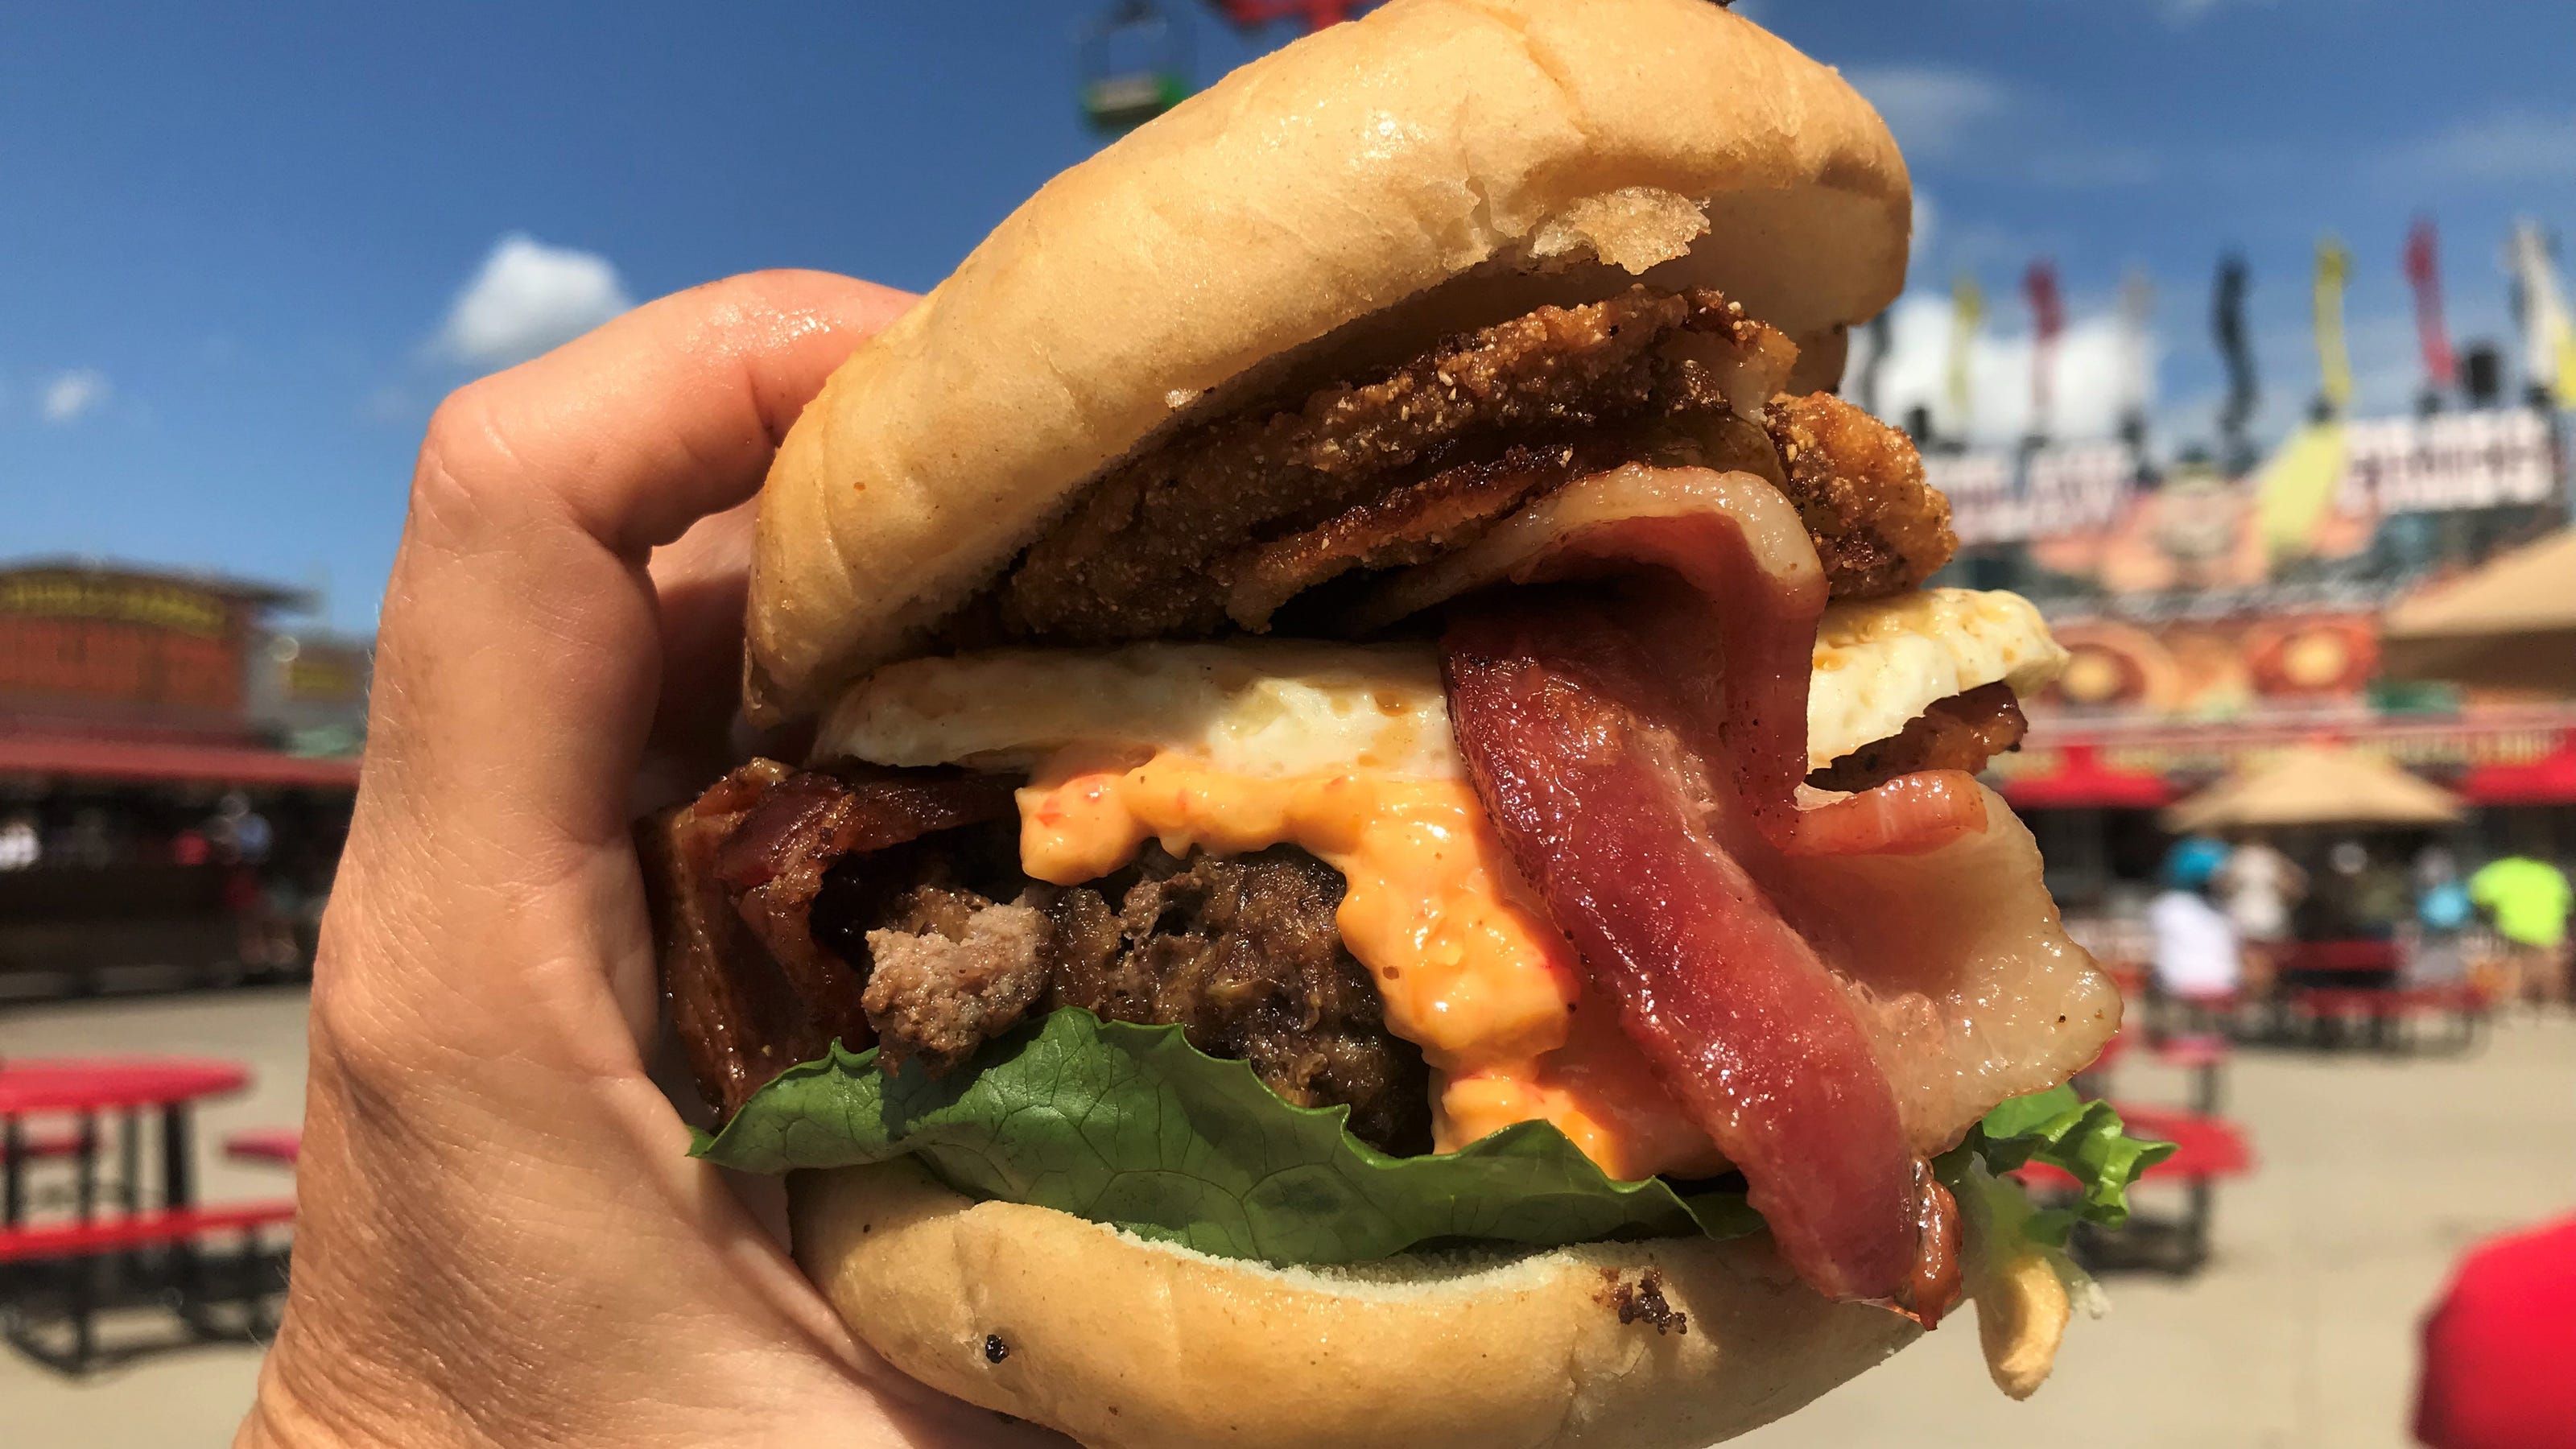 Indiana State Fair food 2019: These are the 10 best things to eat